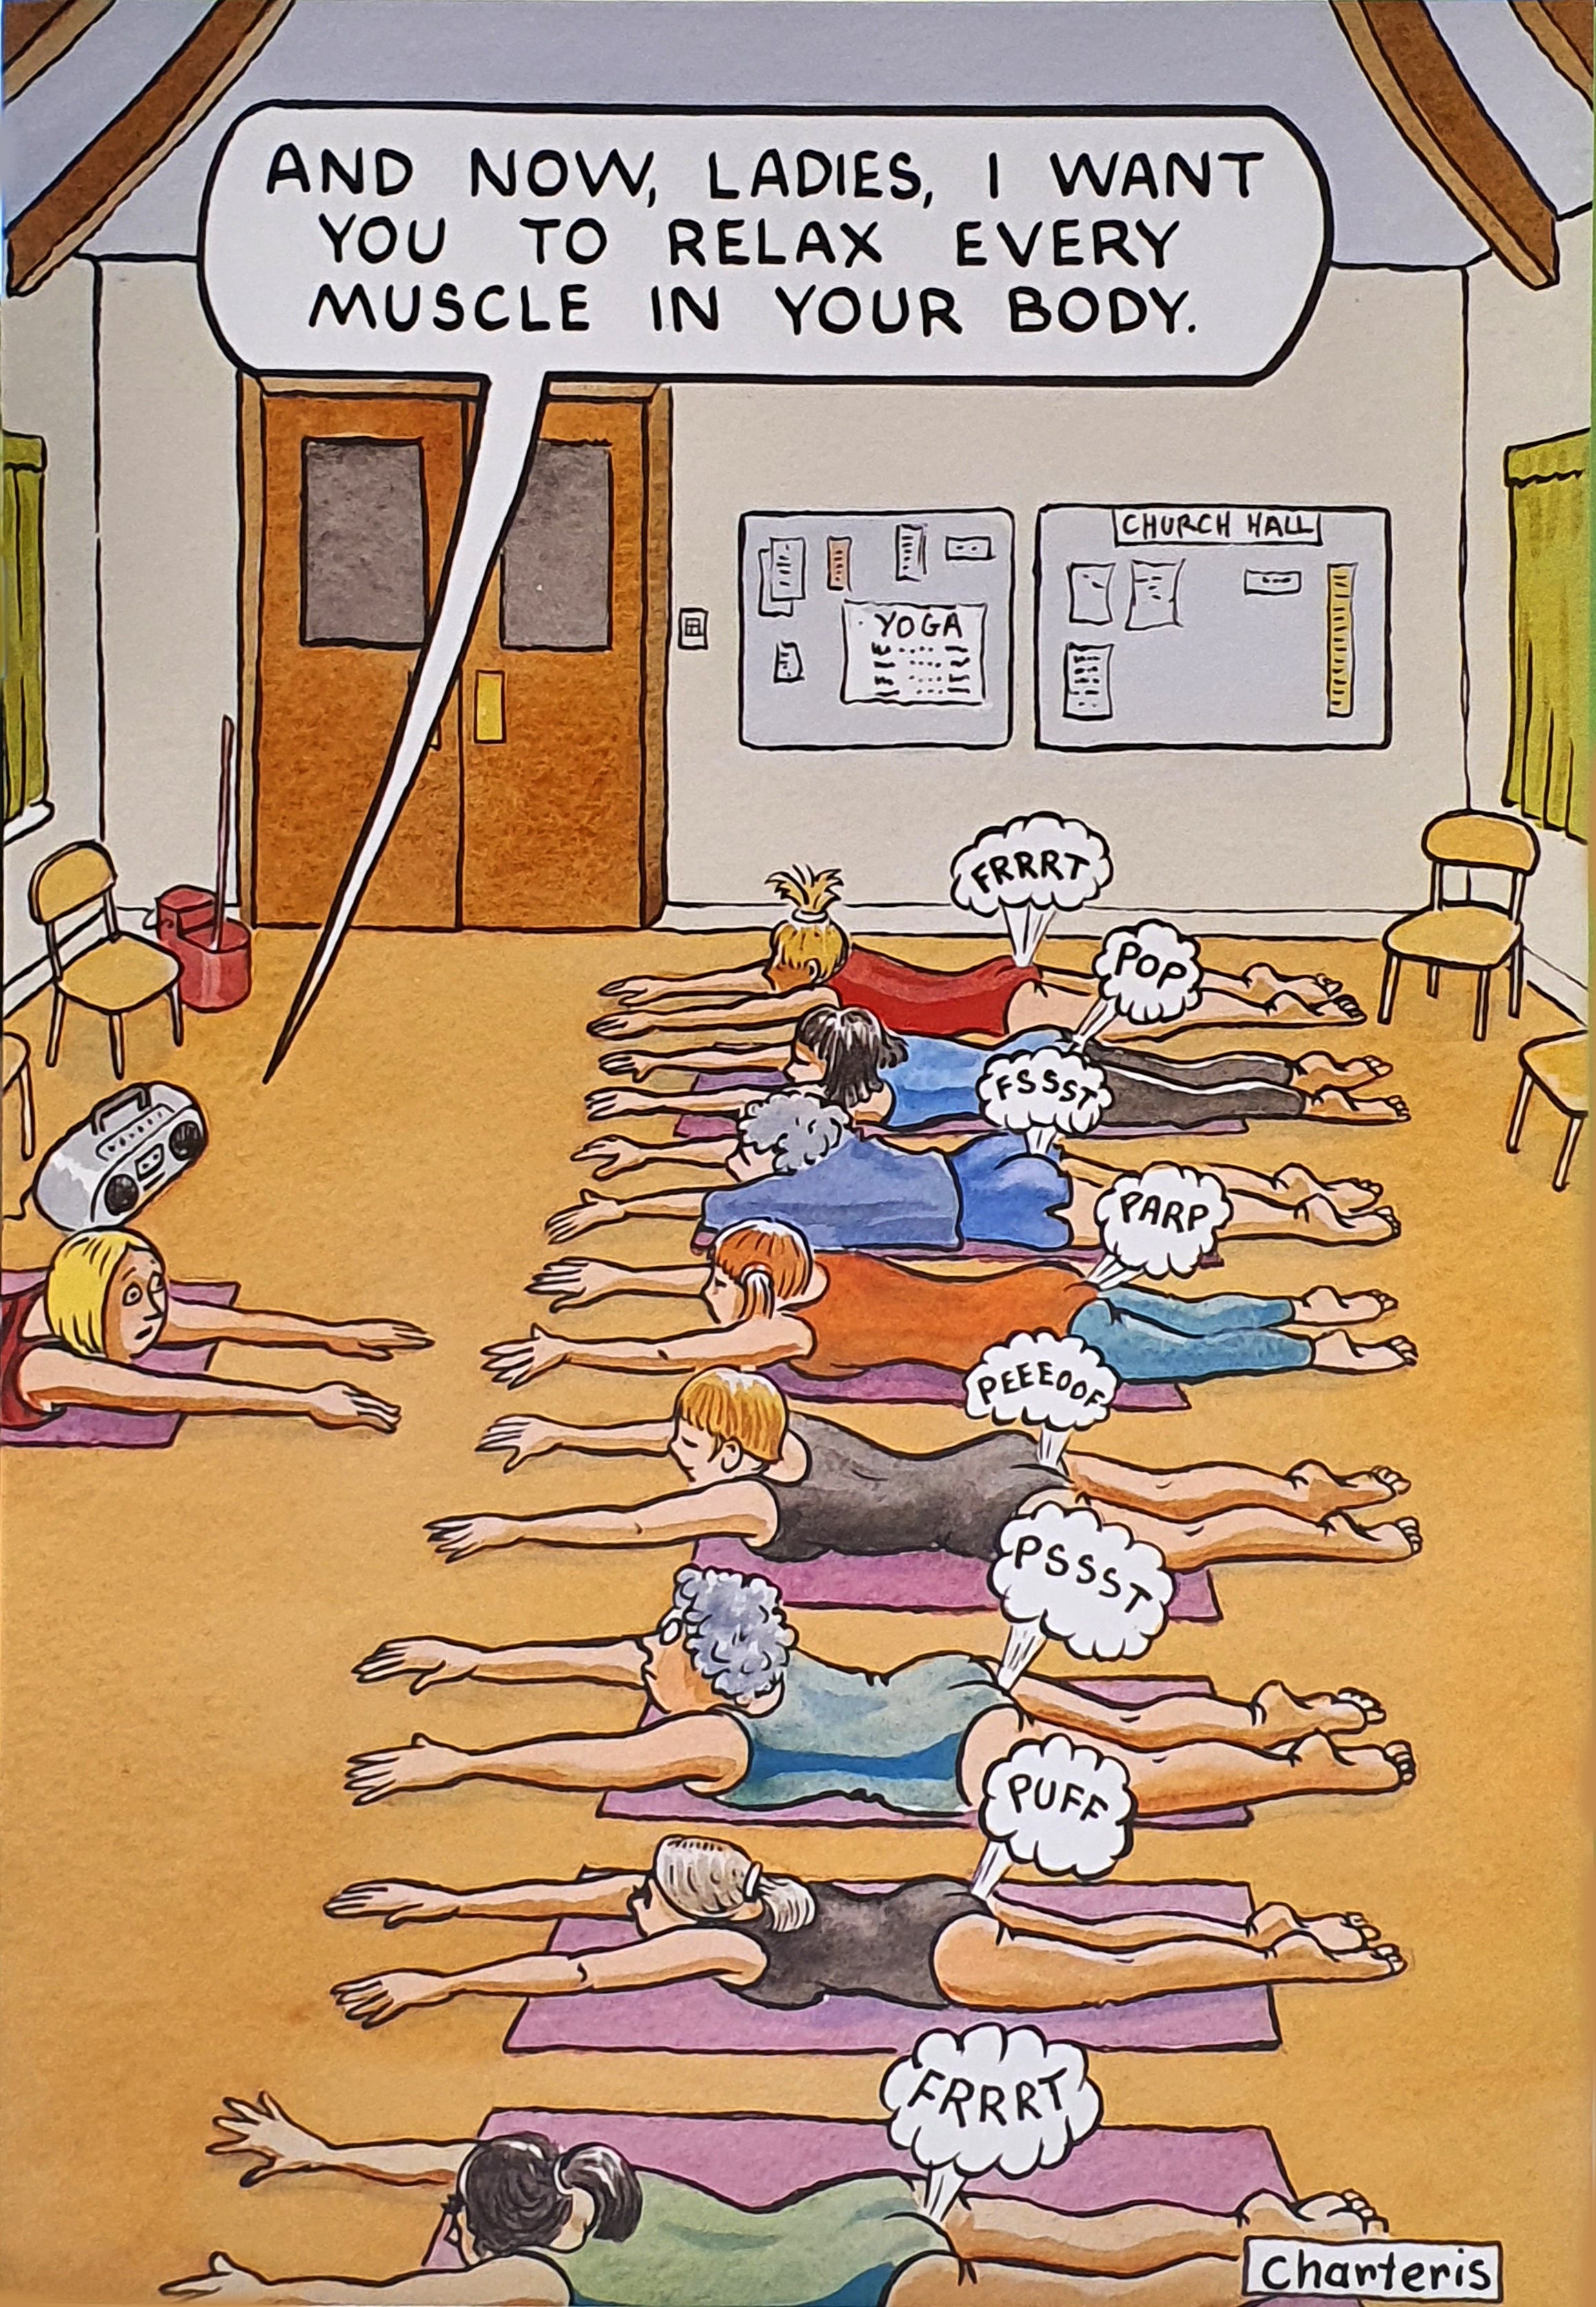 Humourous Birthday Card - Relax Muscles